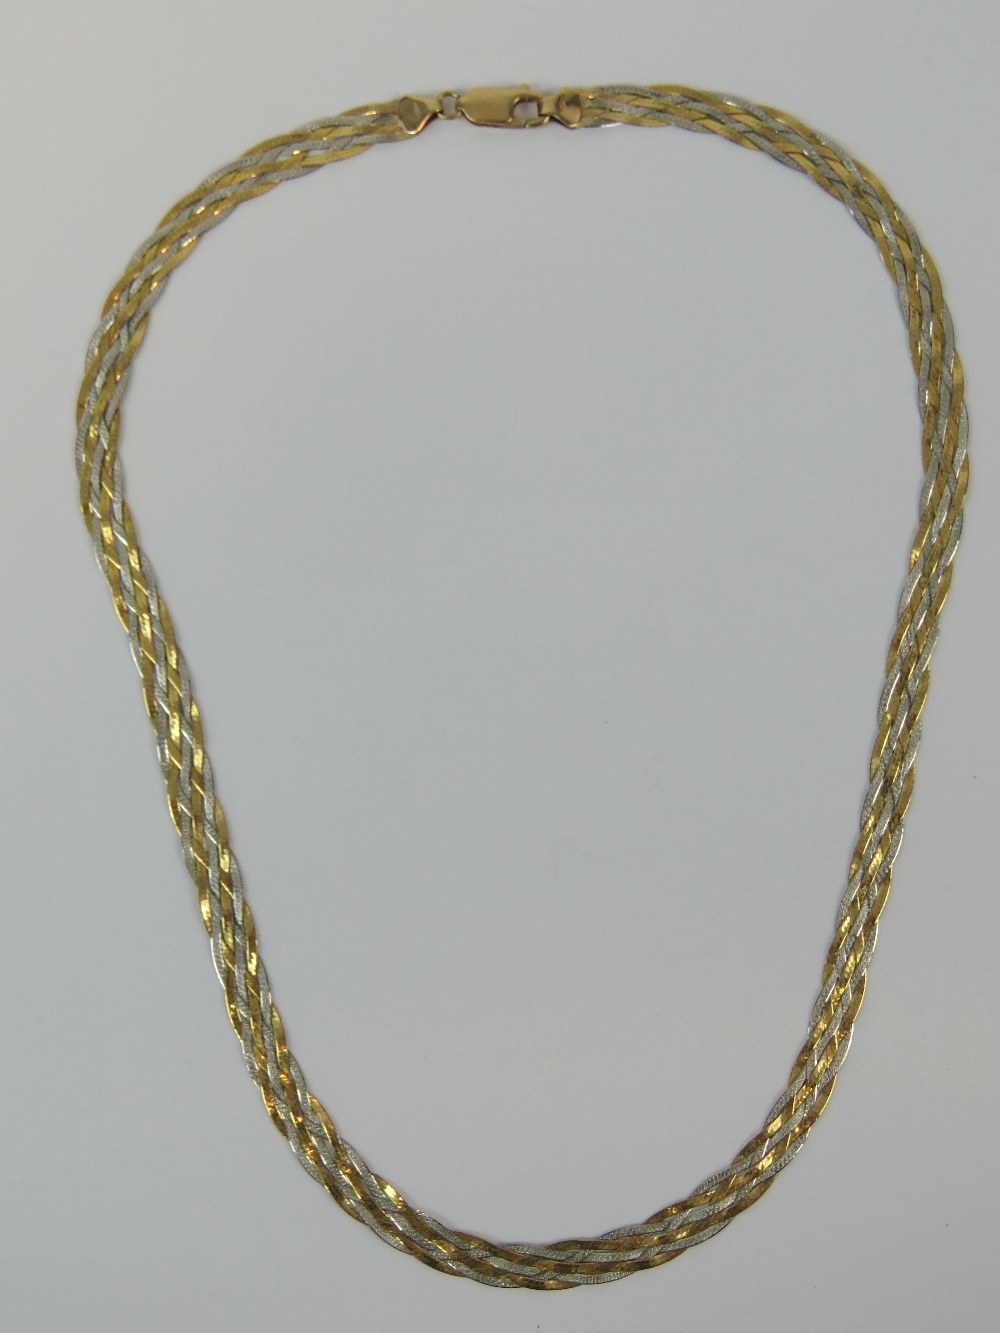 A 9ct gold necklaces having six strands of white and yellow gold woven together, hallmarked 375,